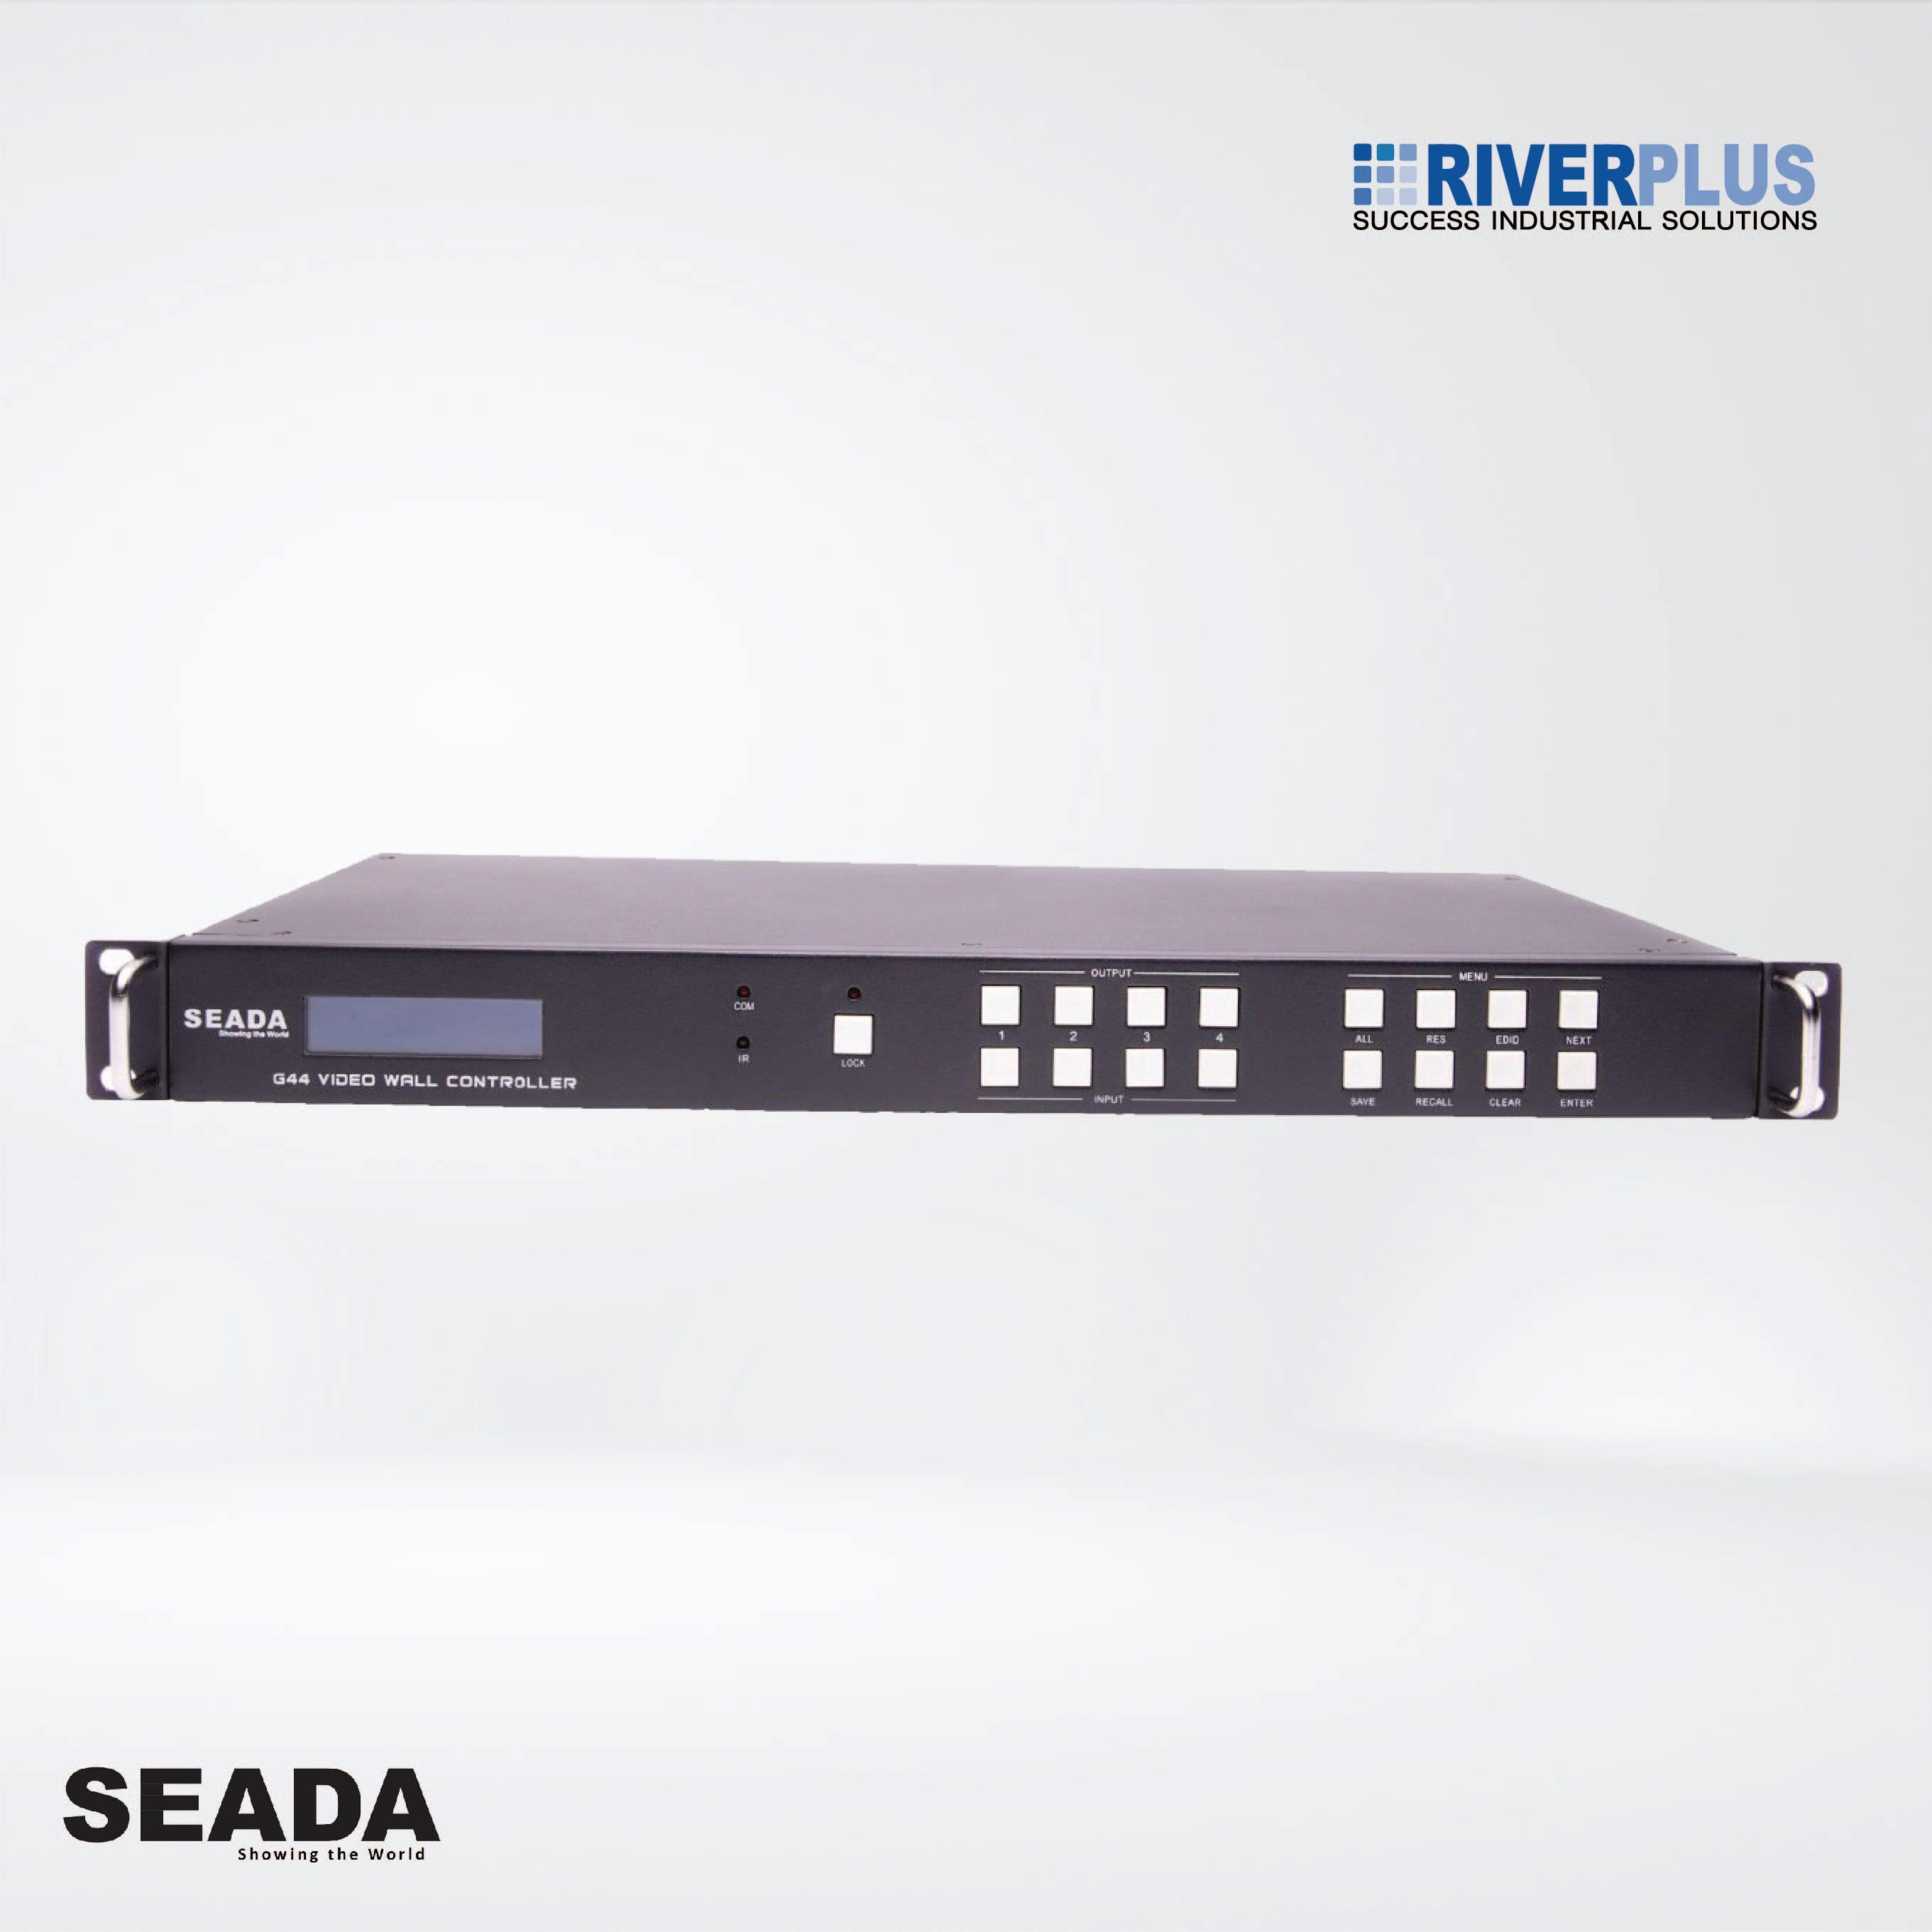 G44-HDMI Up to 4 HDMI inputs ,Resolution up to 4K@60fps 4:4:4. - Riverplus